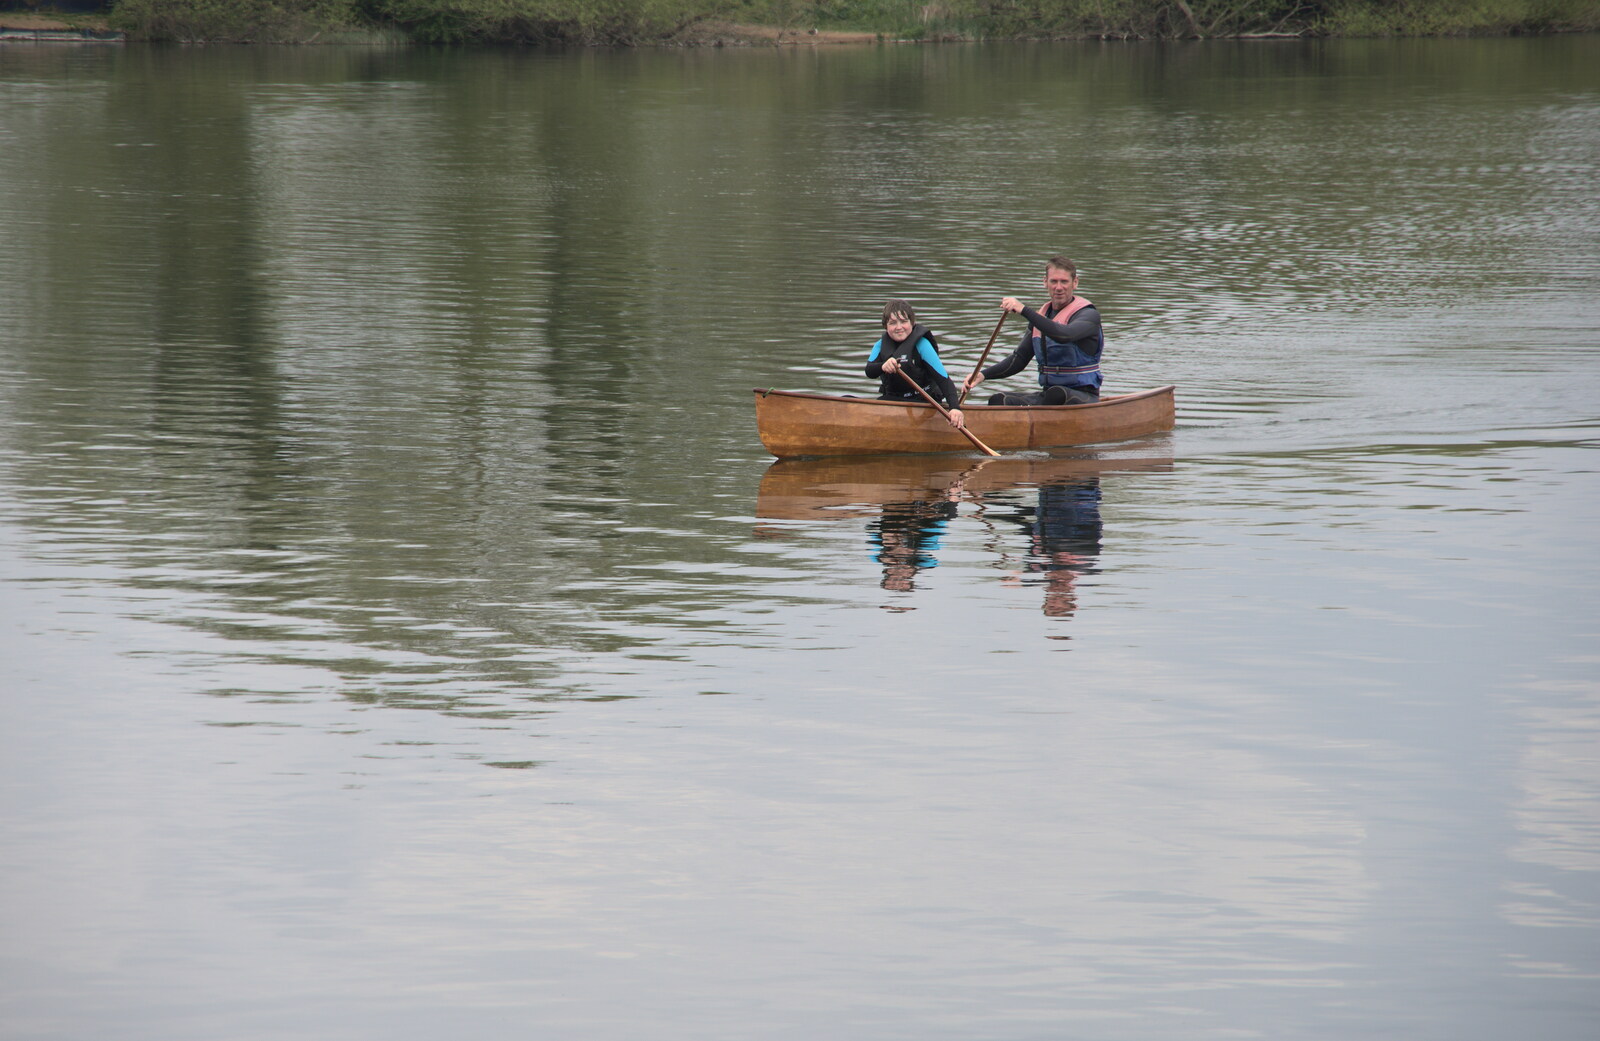 The Canoe's First Outing, Weybread Lake, Harleston - 1st May 2022: Fred comes back from a paddle